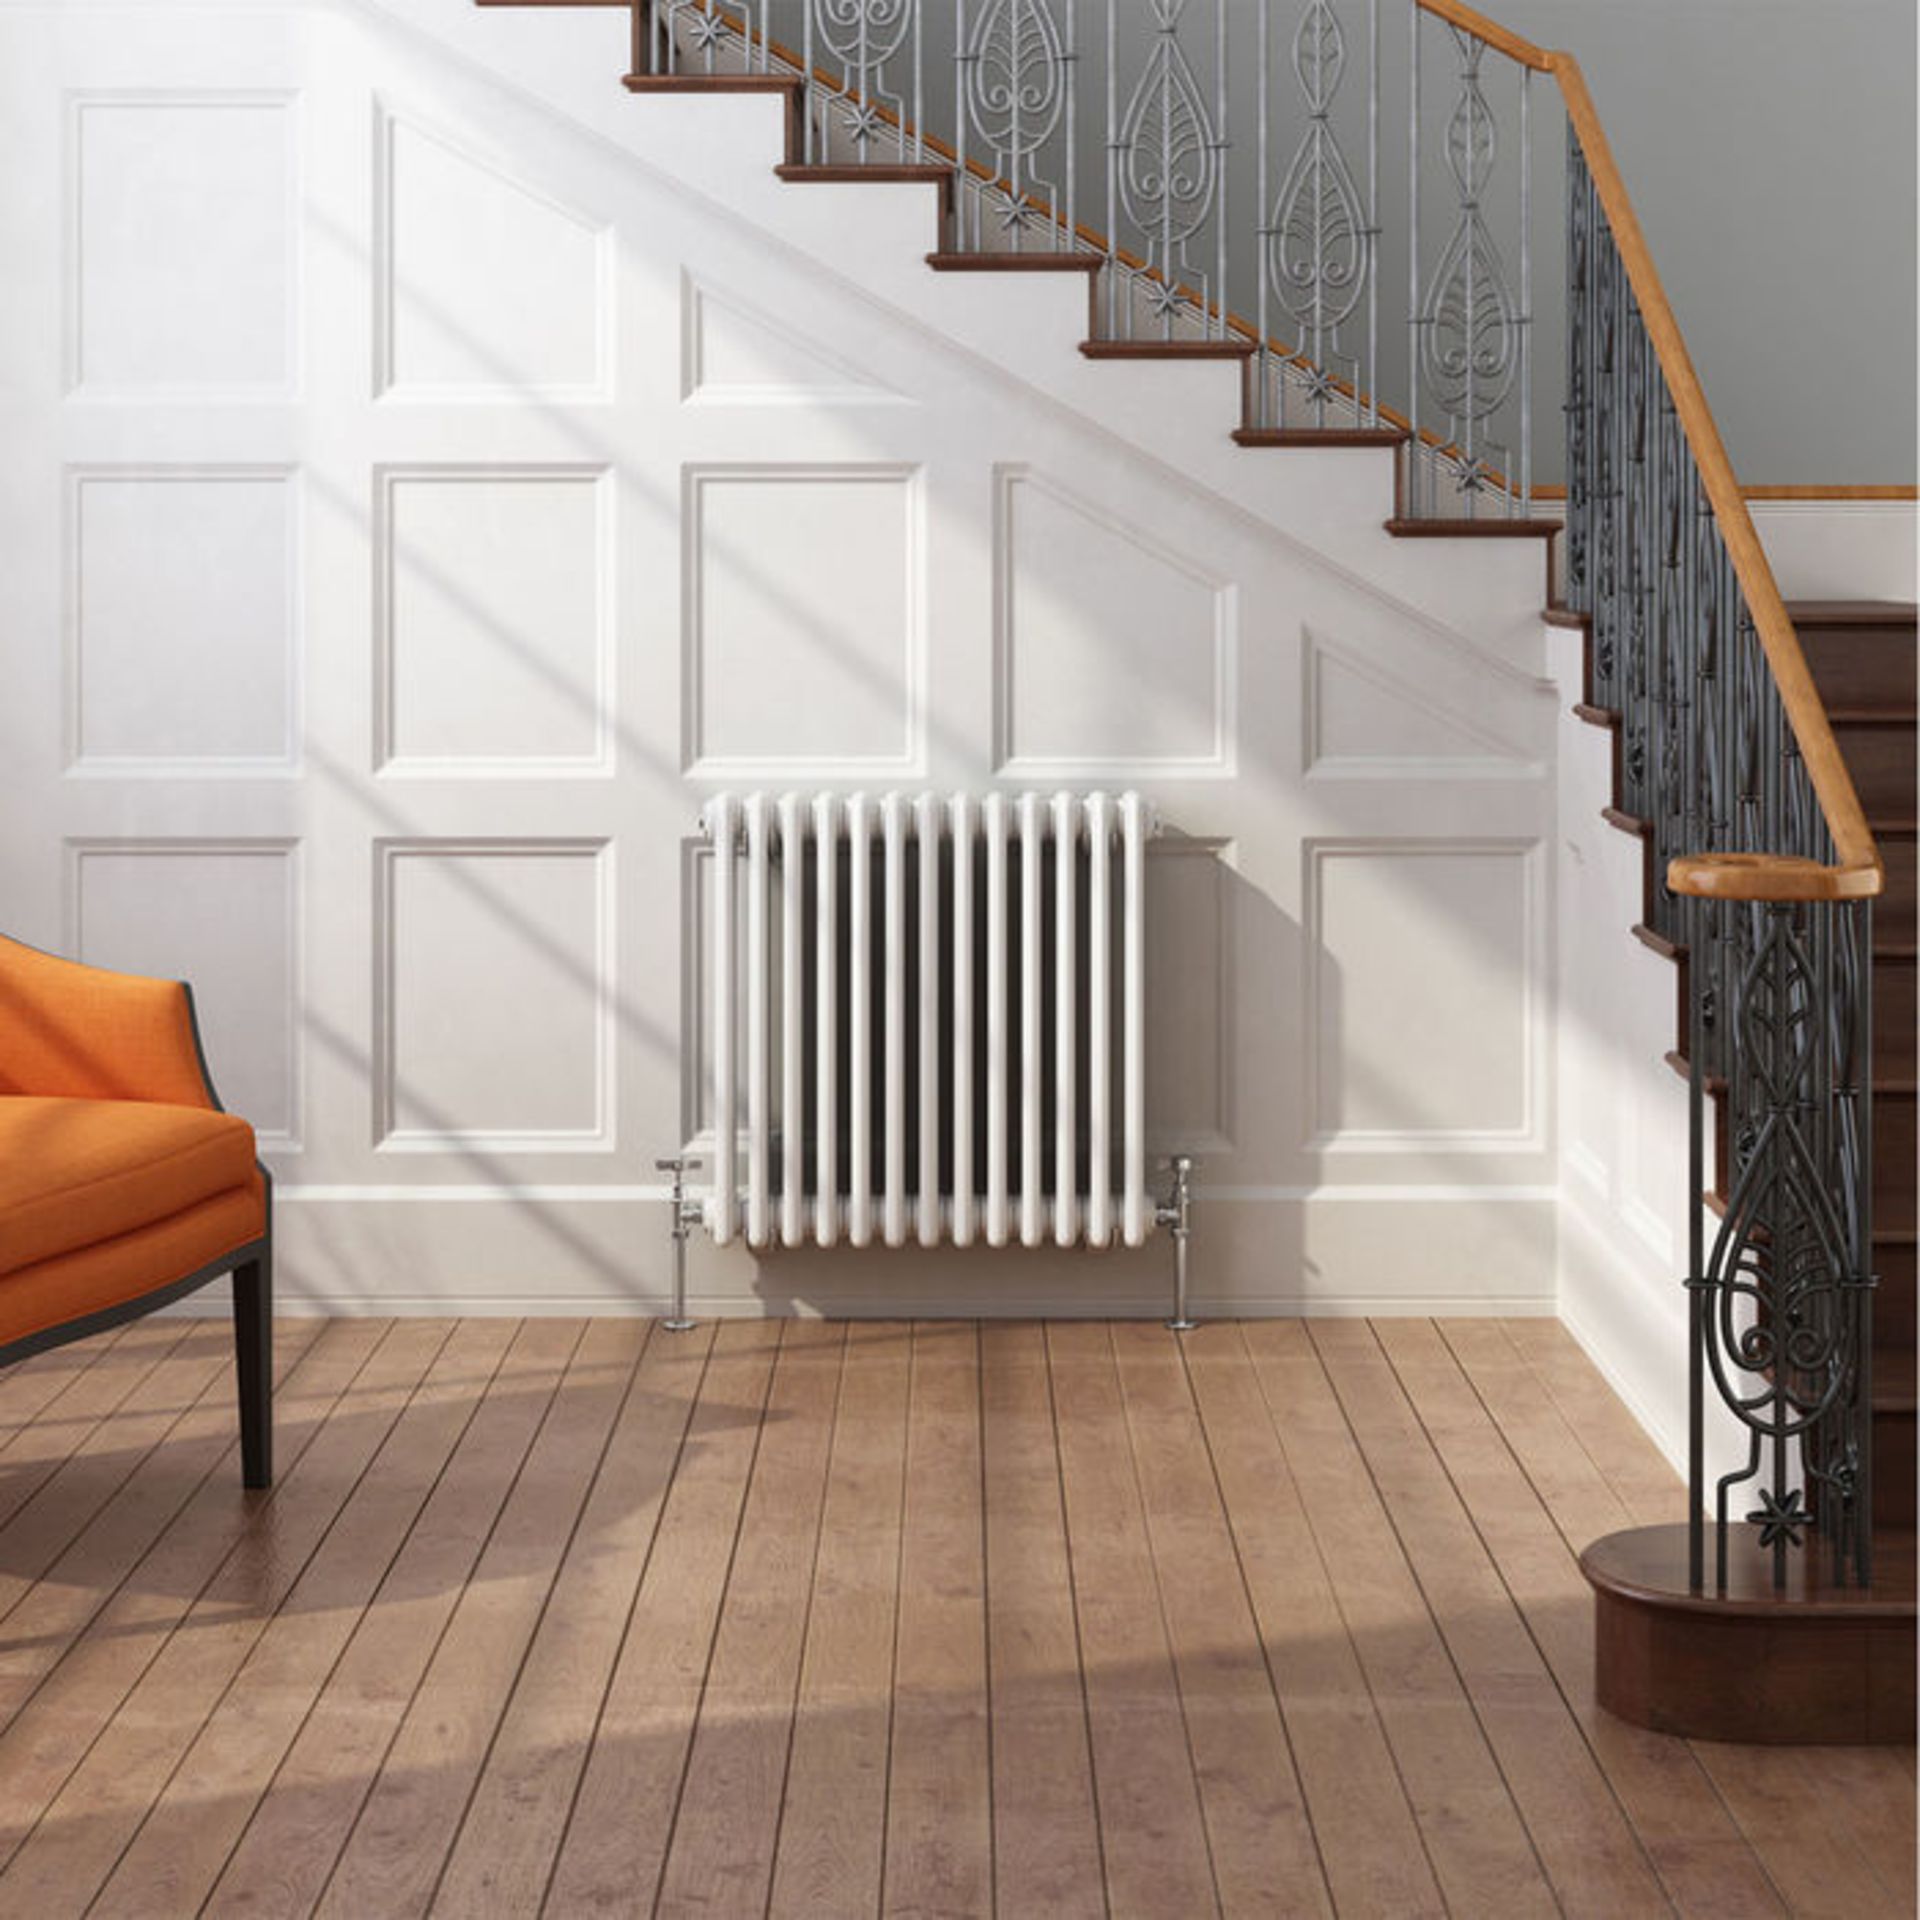 (DW3) 600x603mm White Double Panel Horizontal Colosseum Traditional Radiator. RRP £395.99. For... - Image 2 of 4